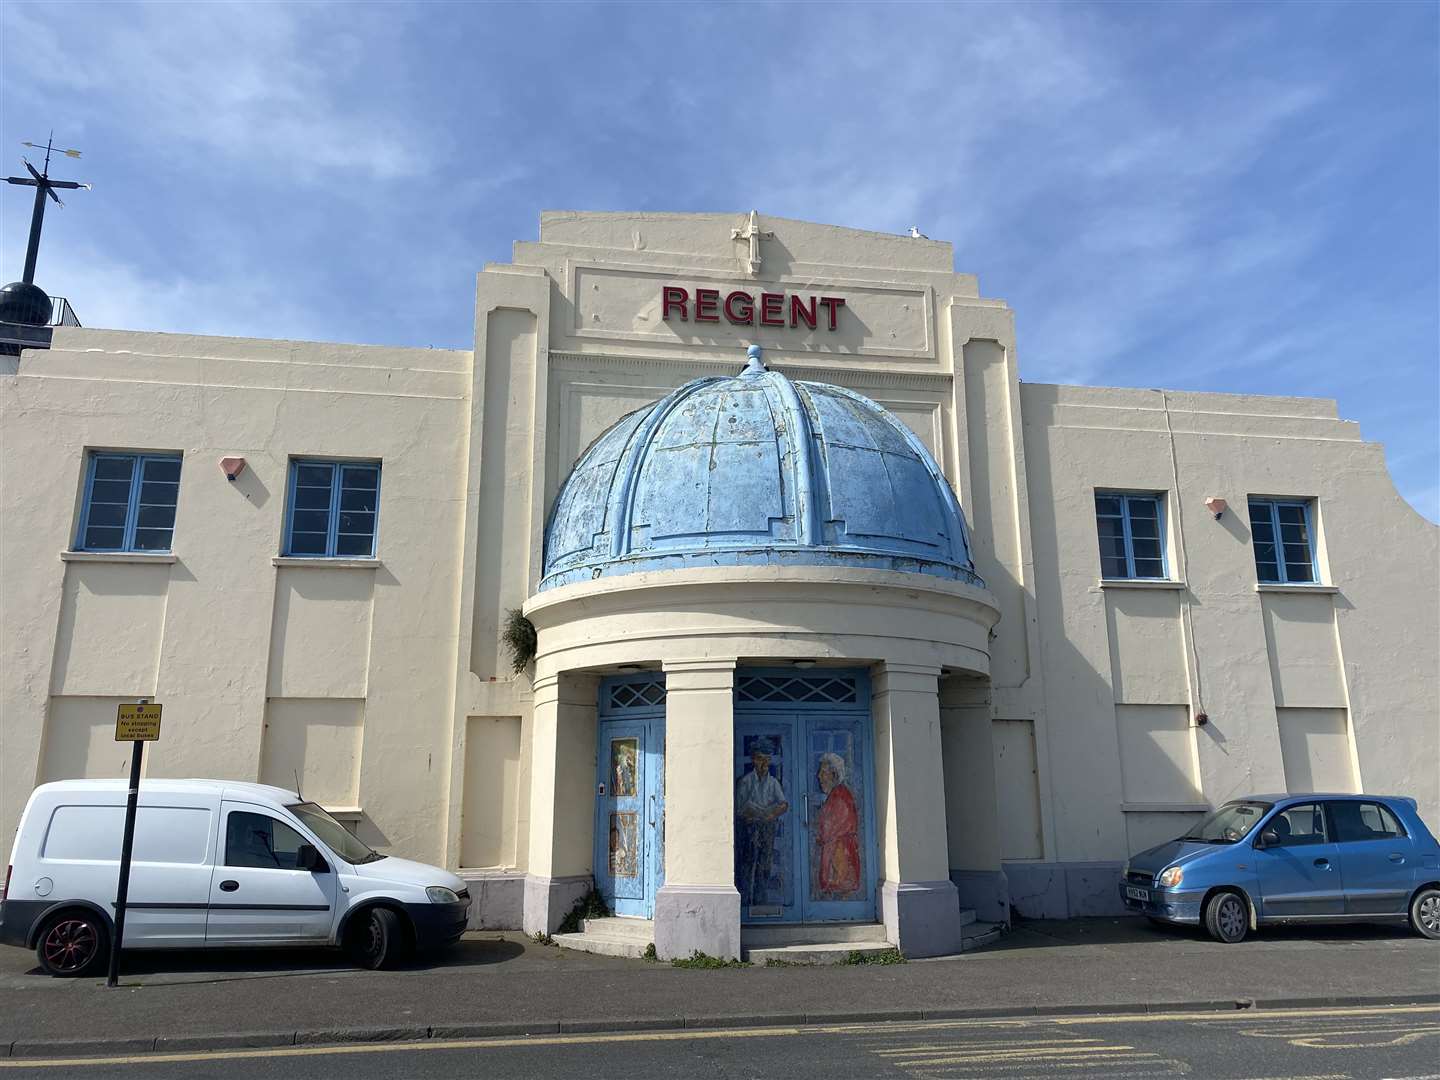 The Regent cinema in Deal, which also previously held a bingo hall, has been empty since 2009